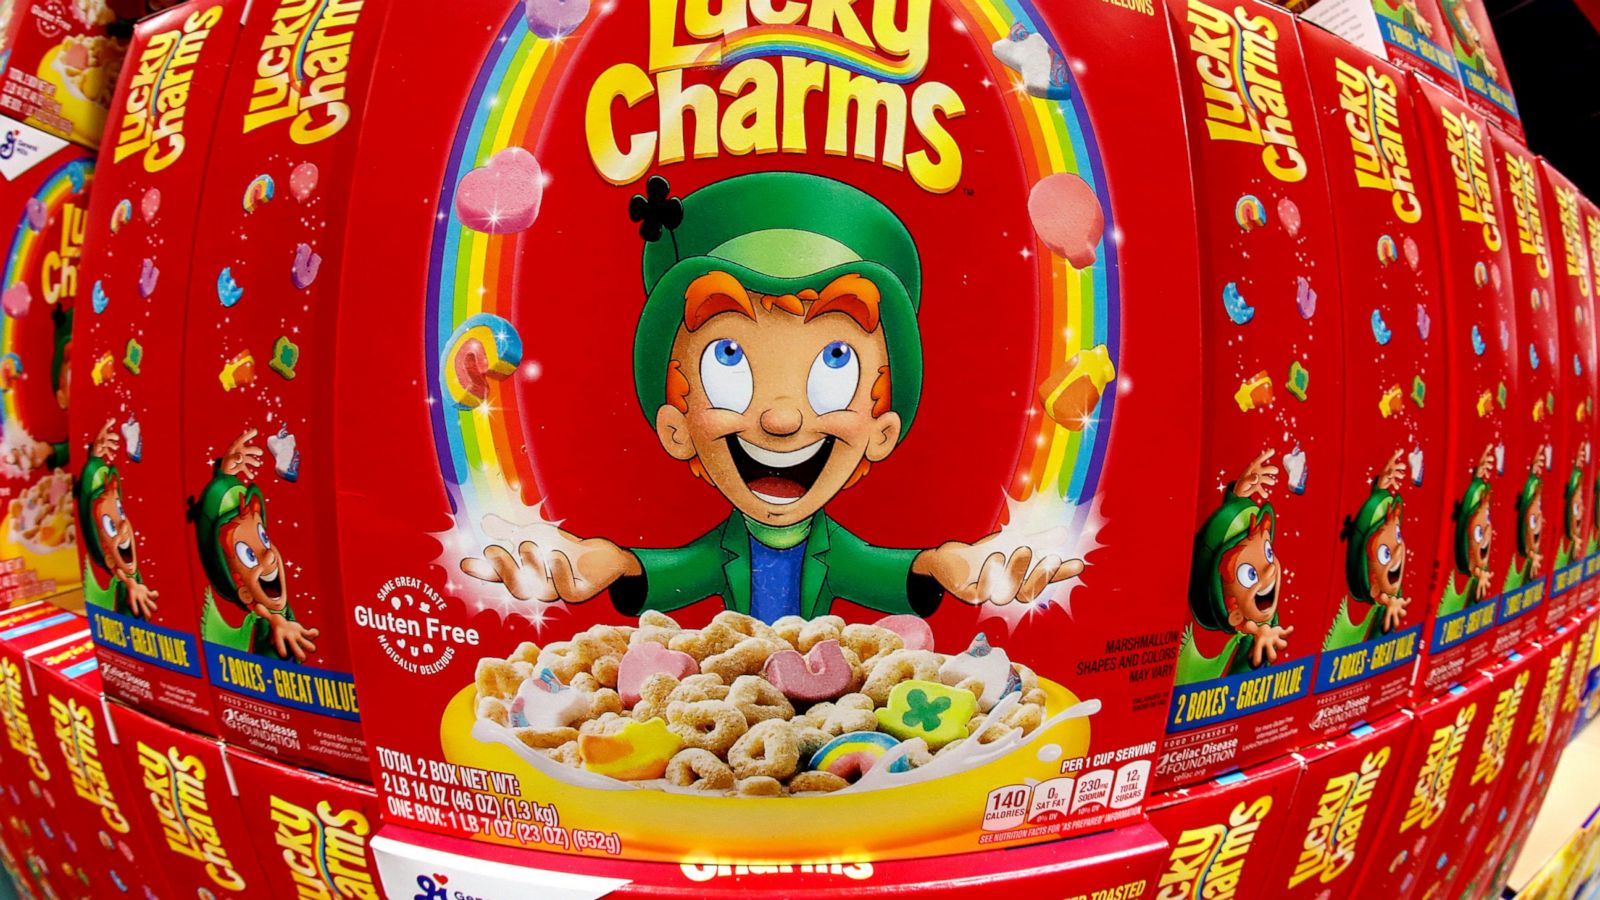 FDA investigating Lucky Charms after reports of illness - ABC News